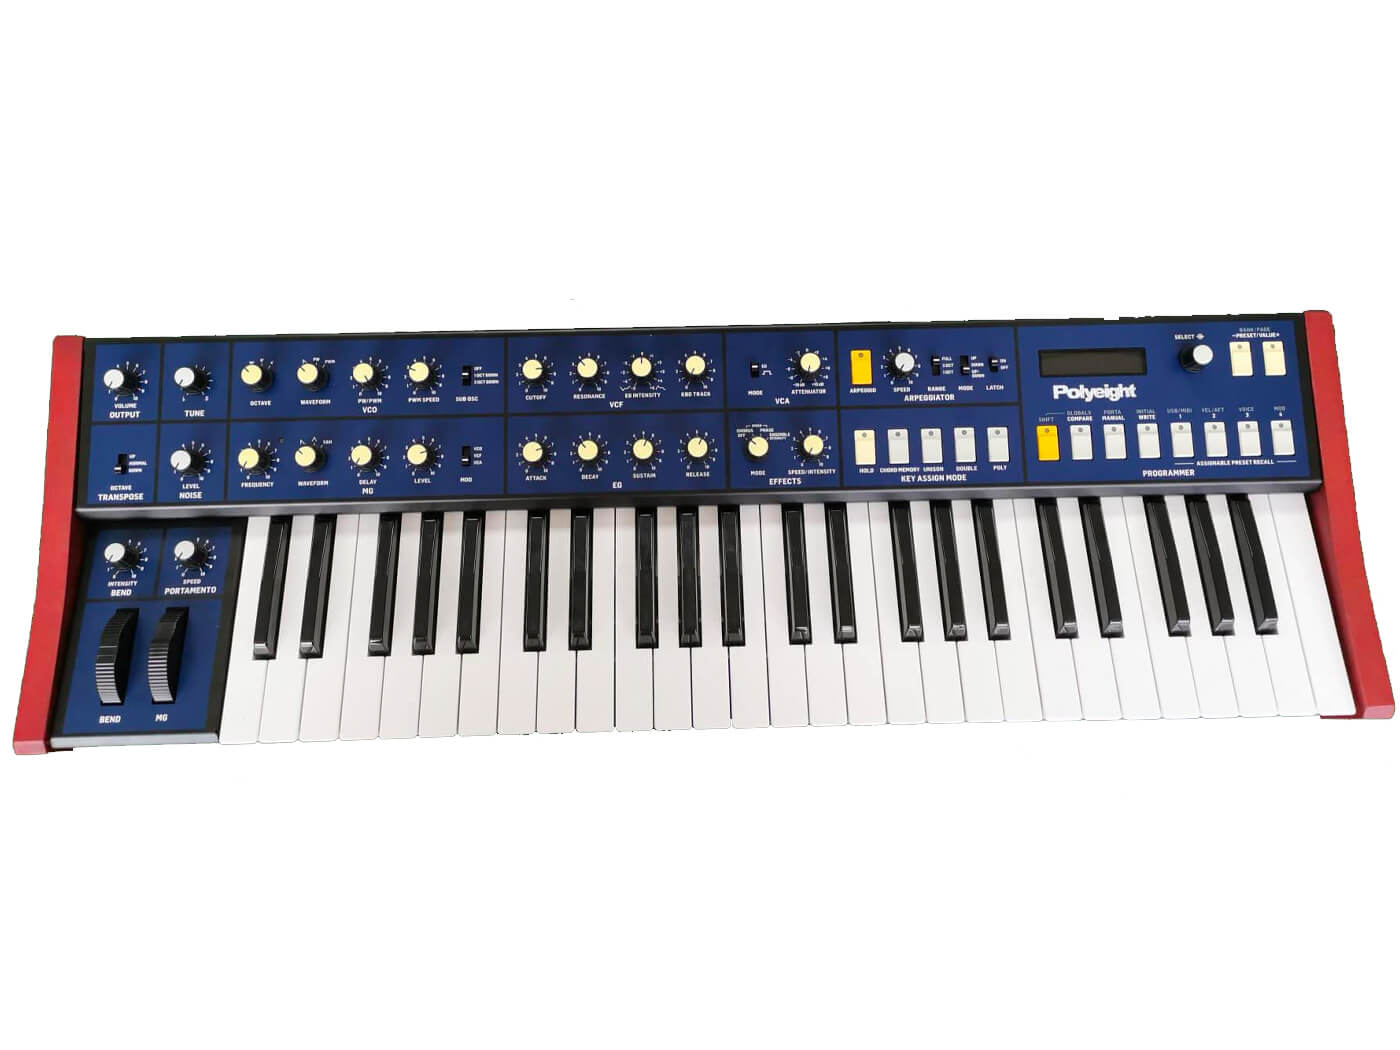 Behringer Polyeight analogue synth